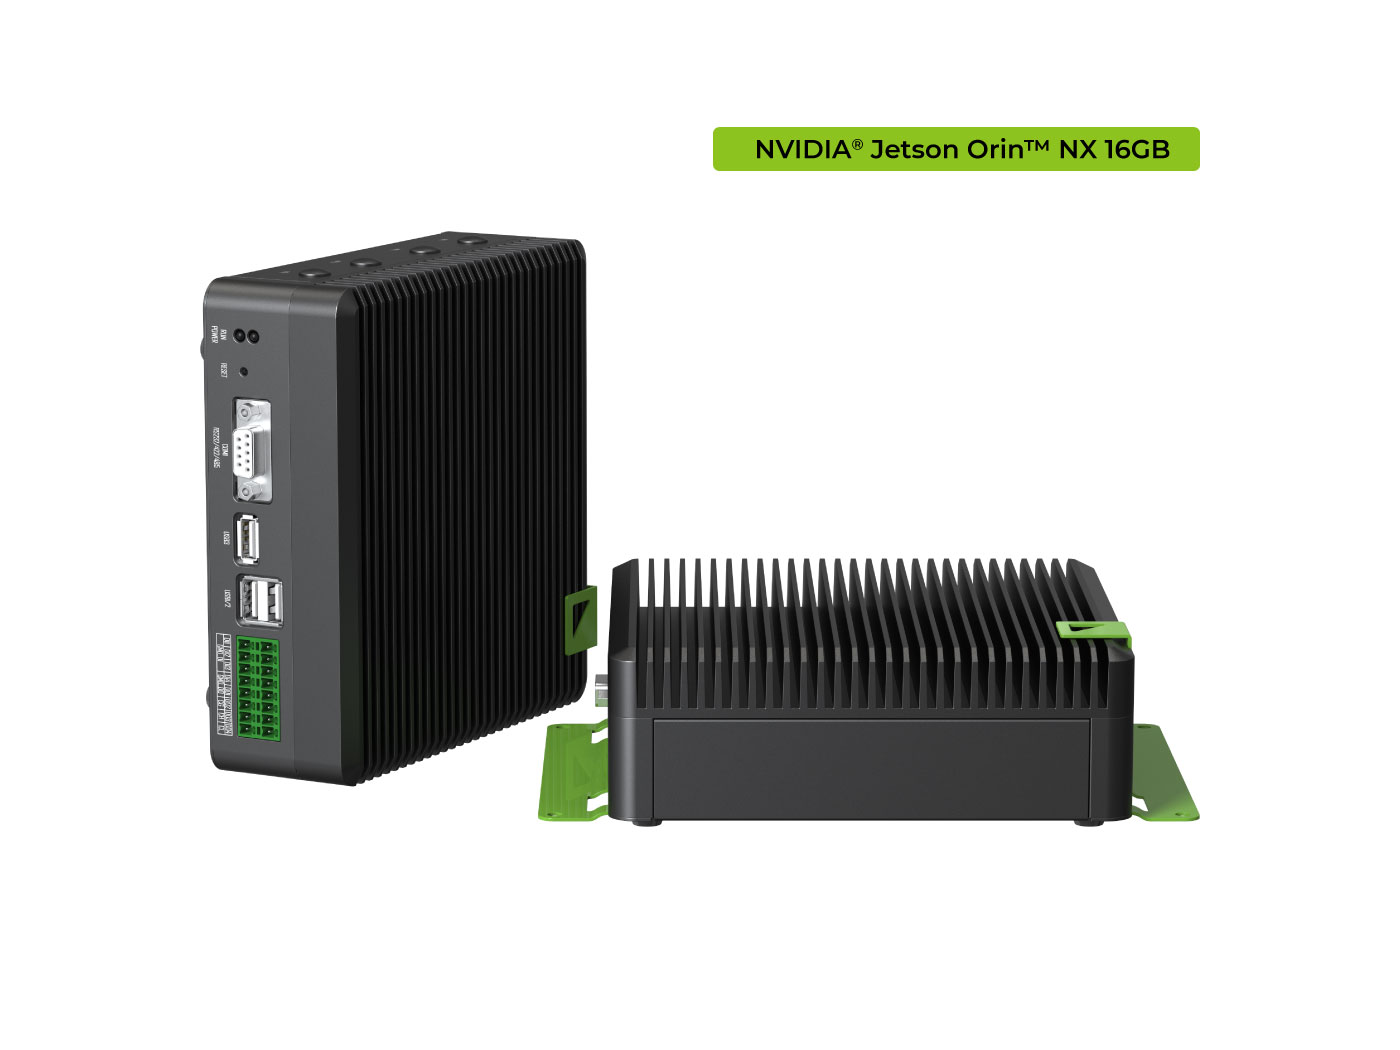 [110110191]reComputer?Industrial?J4012- Fanless Edge AI Device with Jetson Orin™ NX 16GB module, Aluminum case with passive cooling, 2xRJ45 GbE, 1xRS232/RS-422/RS-485, 4xDI/DO, 1xCAN, 3xUSB3.2, Pre-installed Je